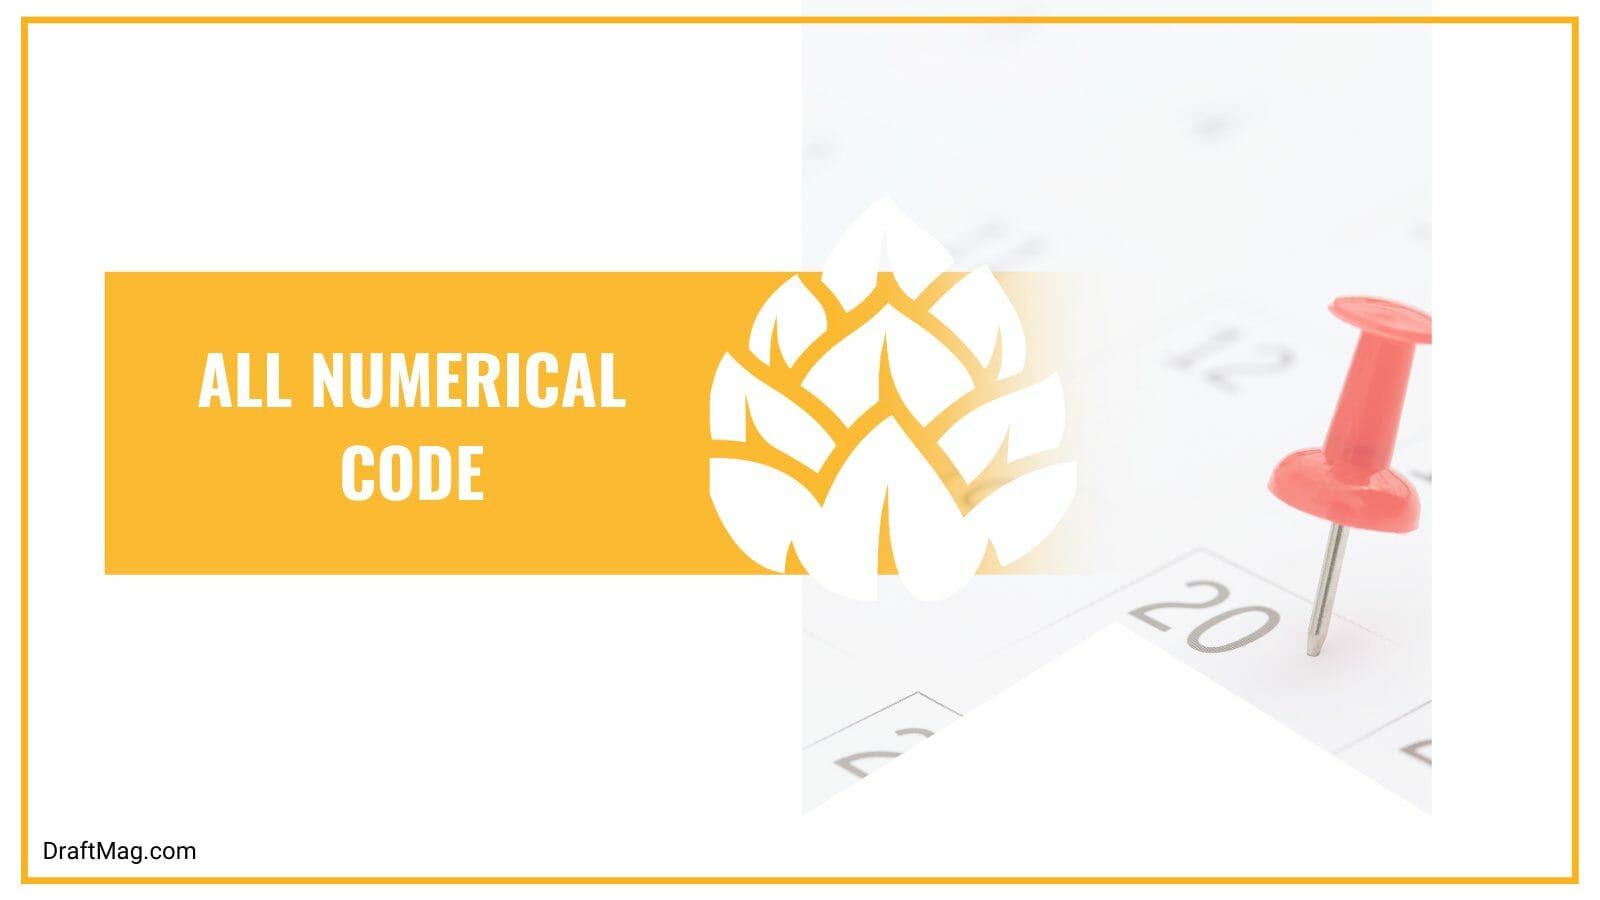 Numerical code for expiration dates